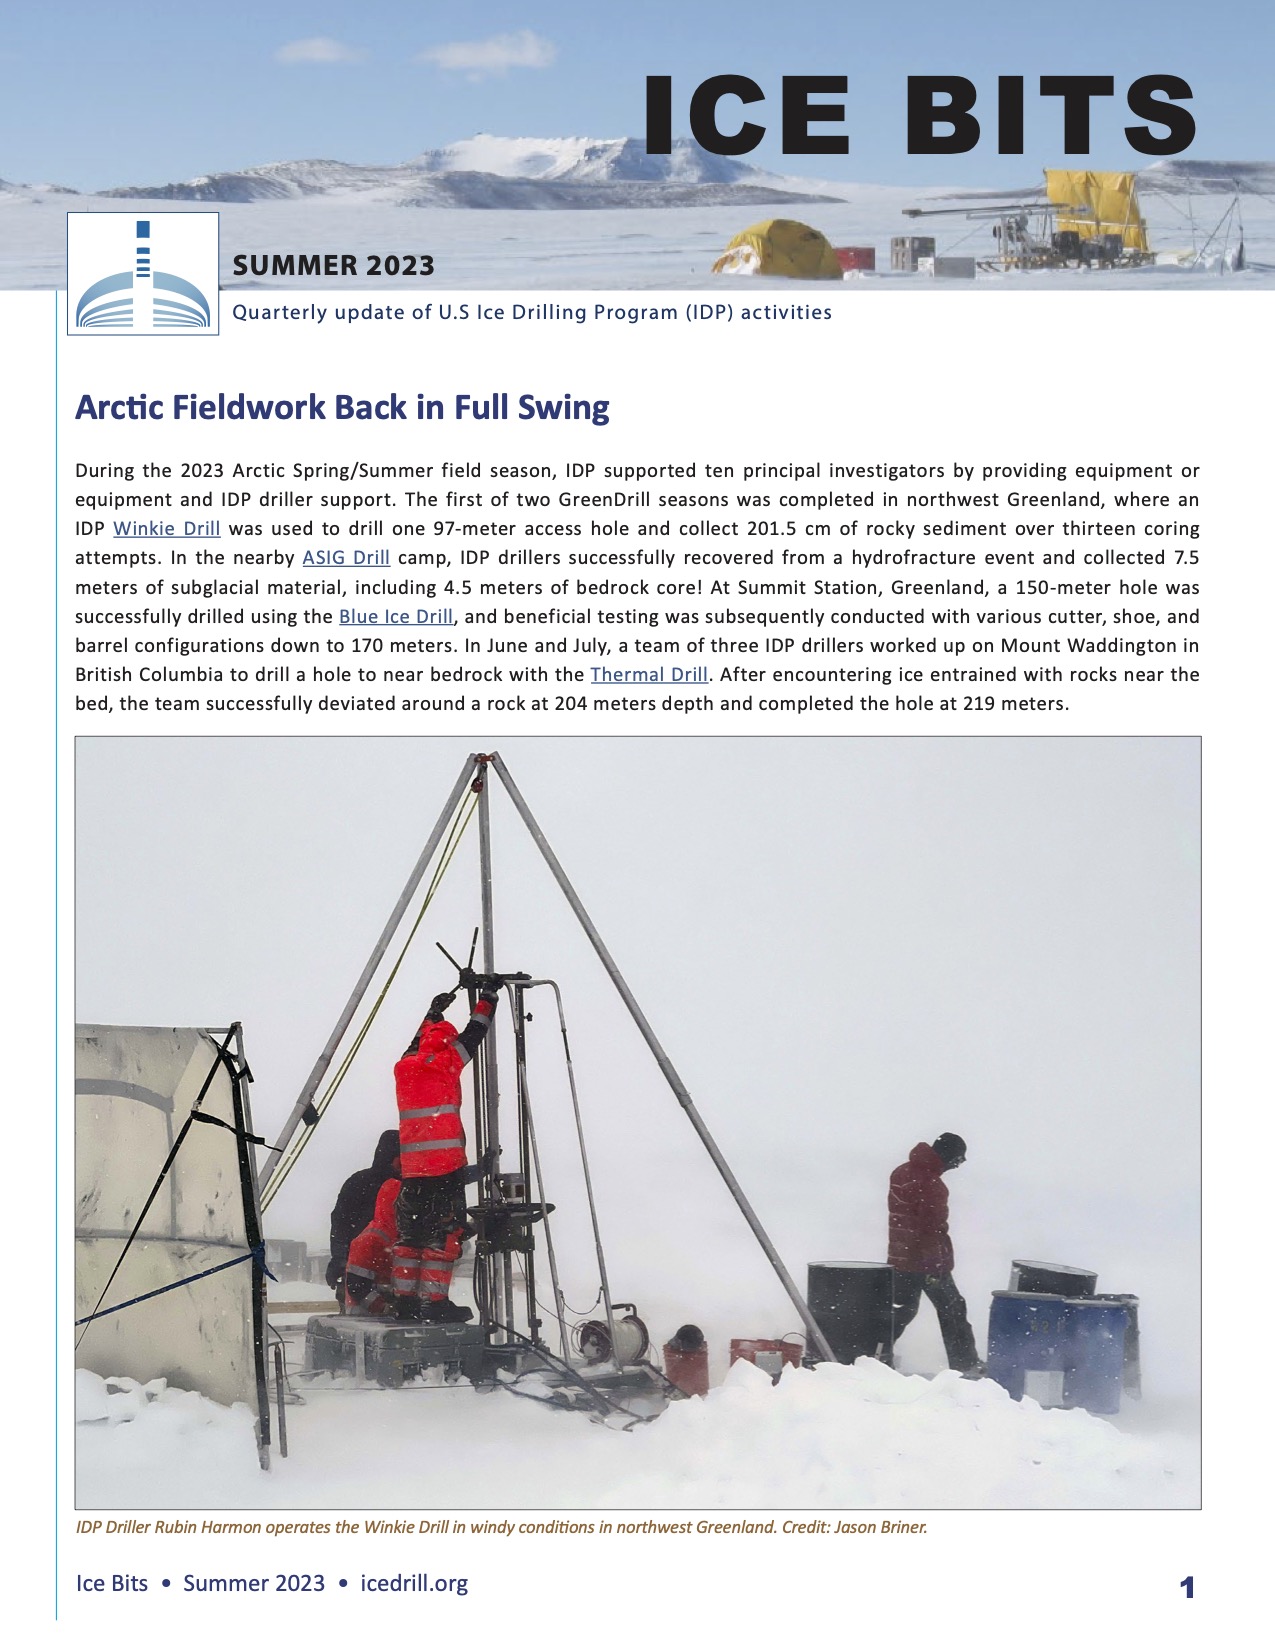 Cover of Ice Bits newsletter